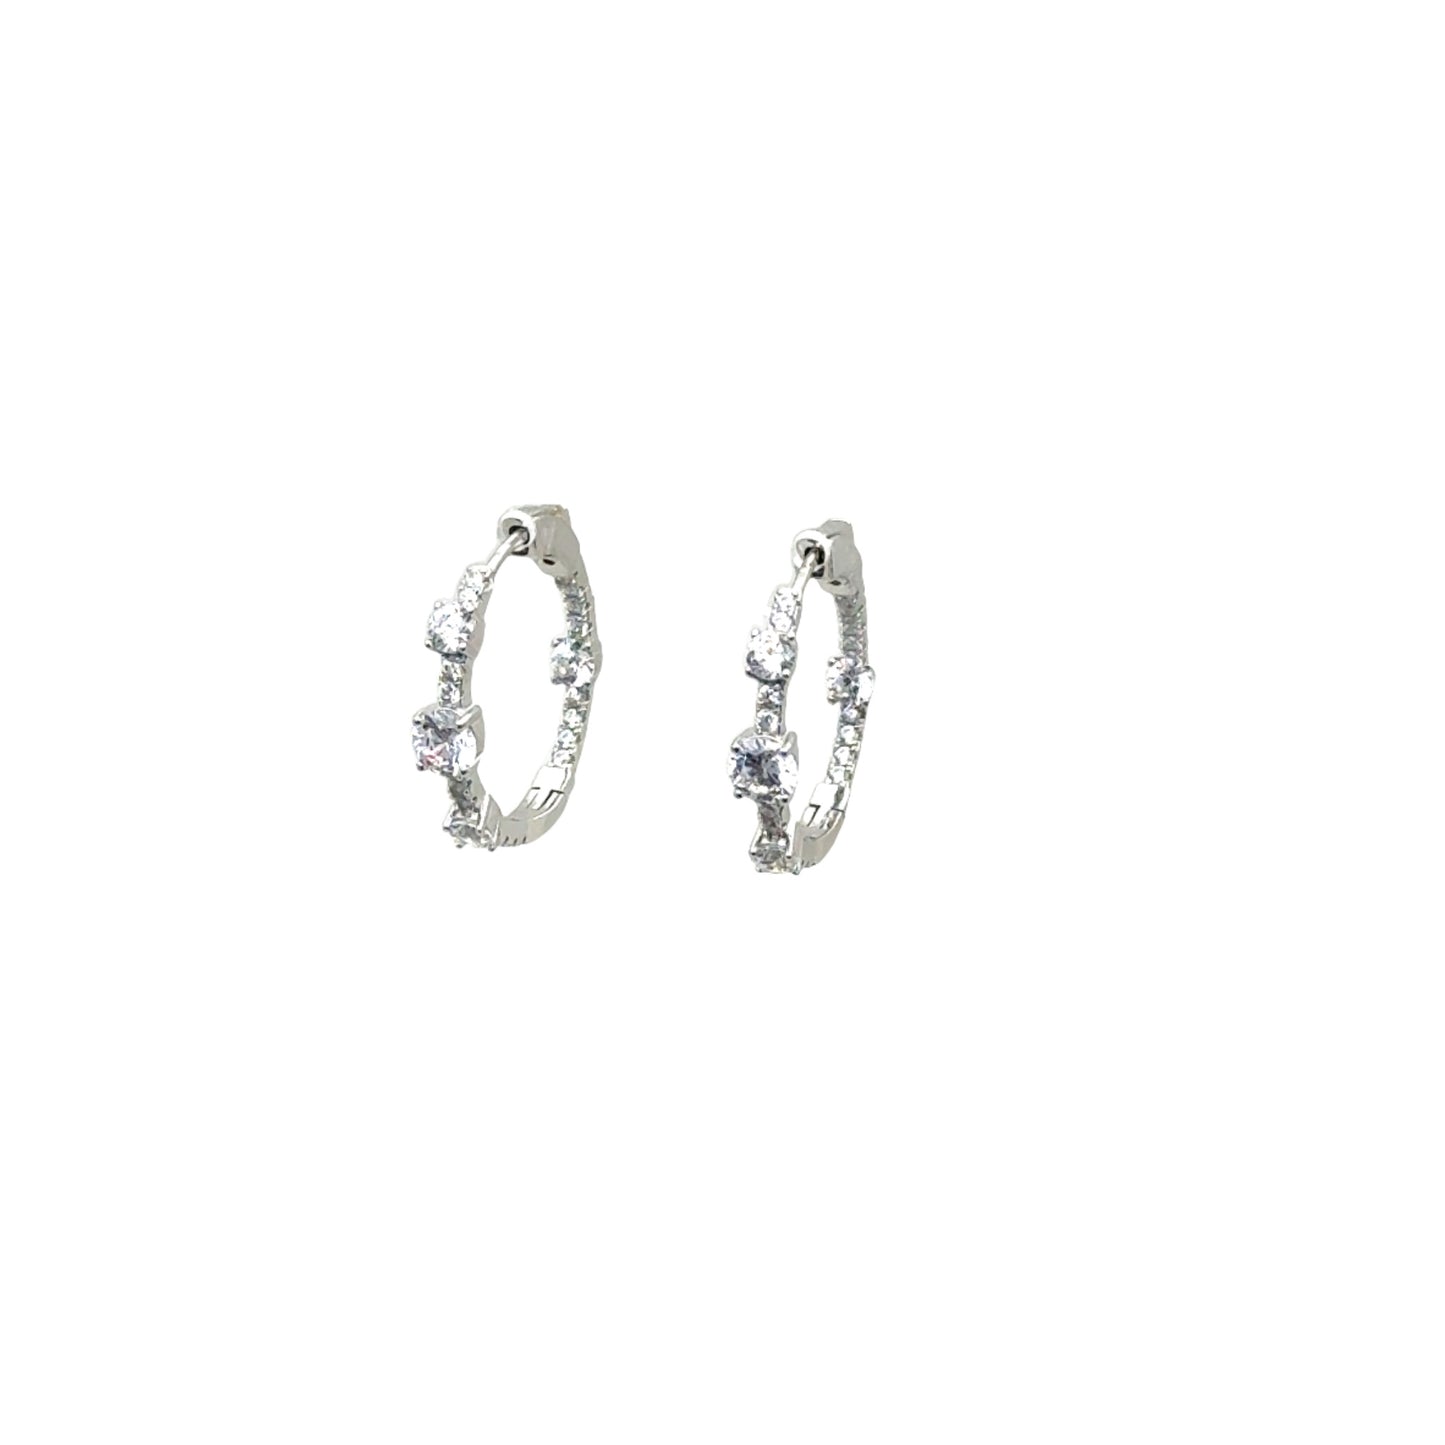 Medium Tennis Earrings with Sterling Silver or 18k Gold Over Silver with CZs